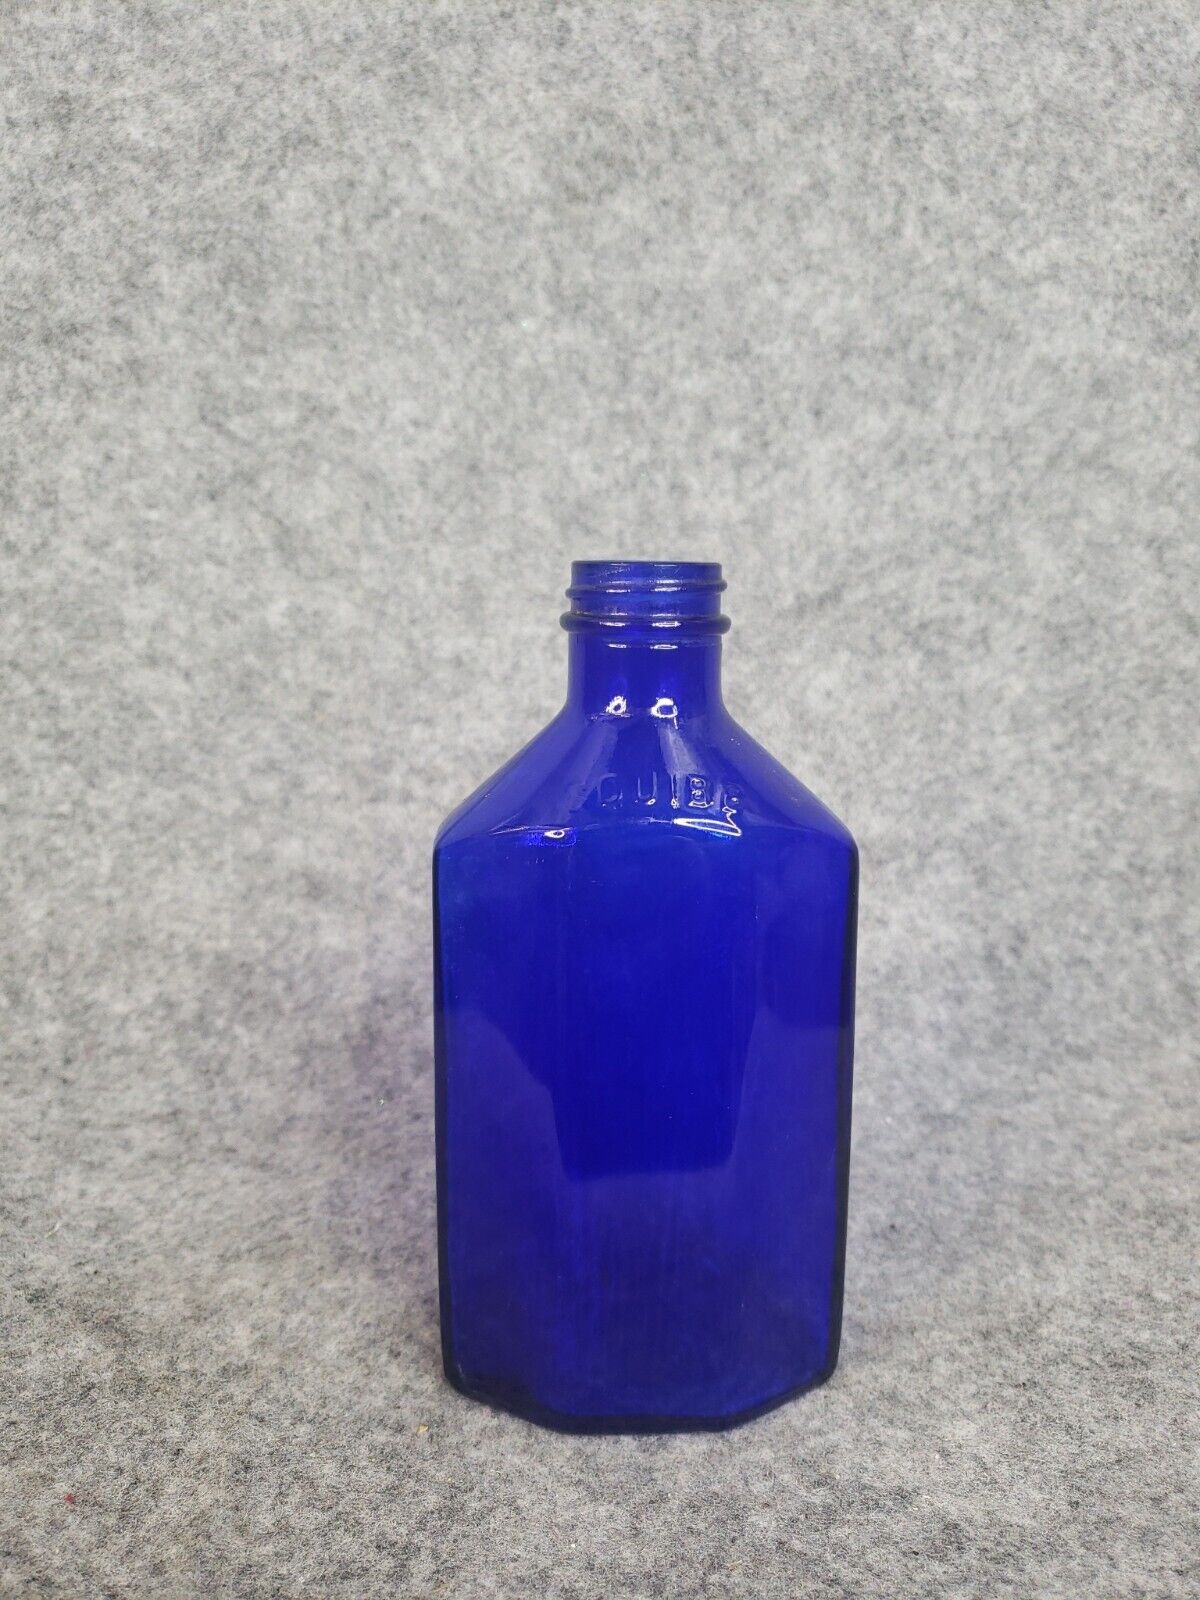 Vintage Squibb Milk of Magnesia Glass Bottle Collectable Glass Home Decor USA 